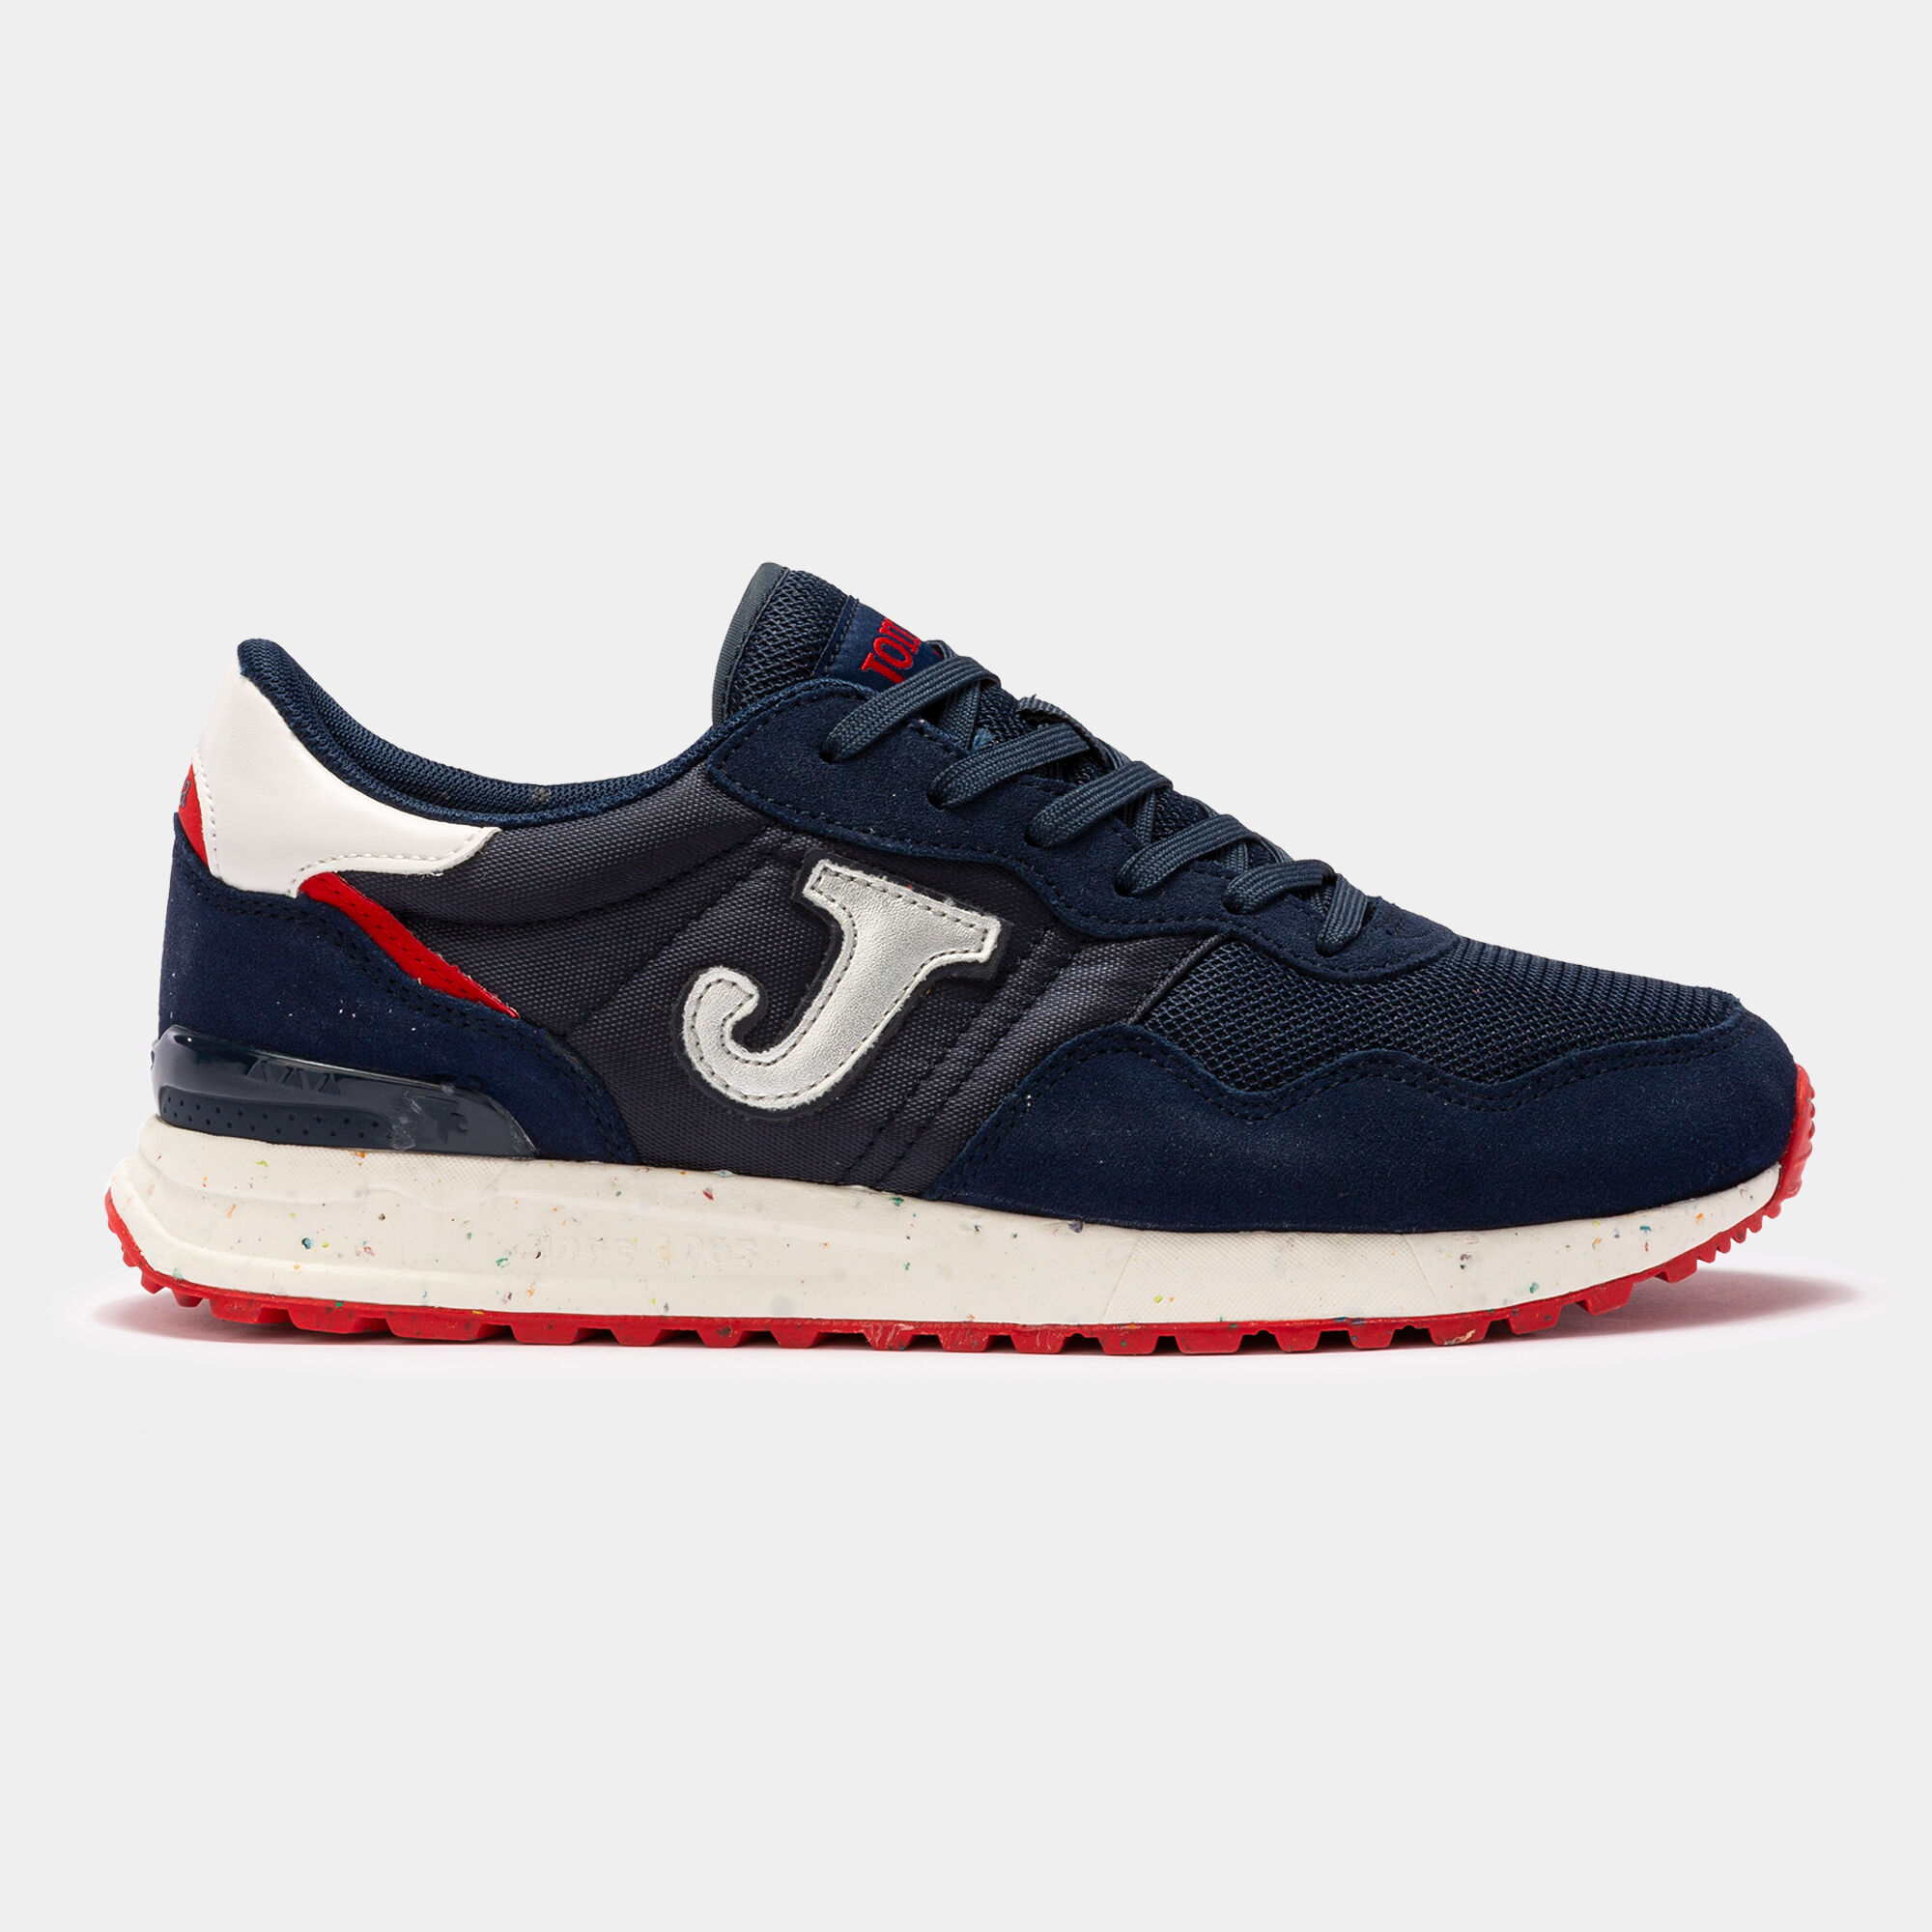 CASUAL SHOES C.367 22 MAN NAVY BLUE RED